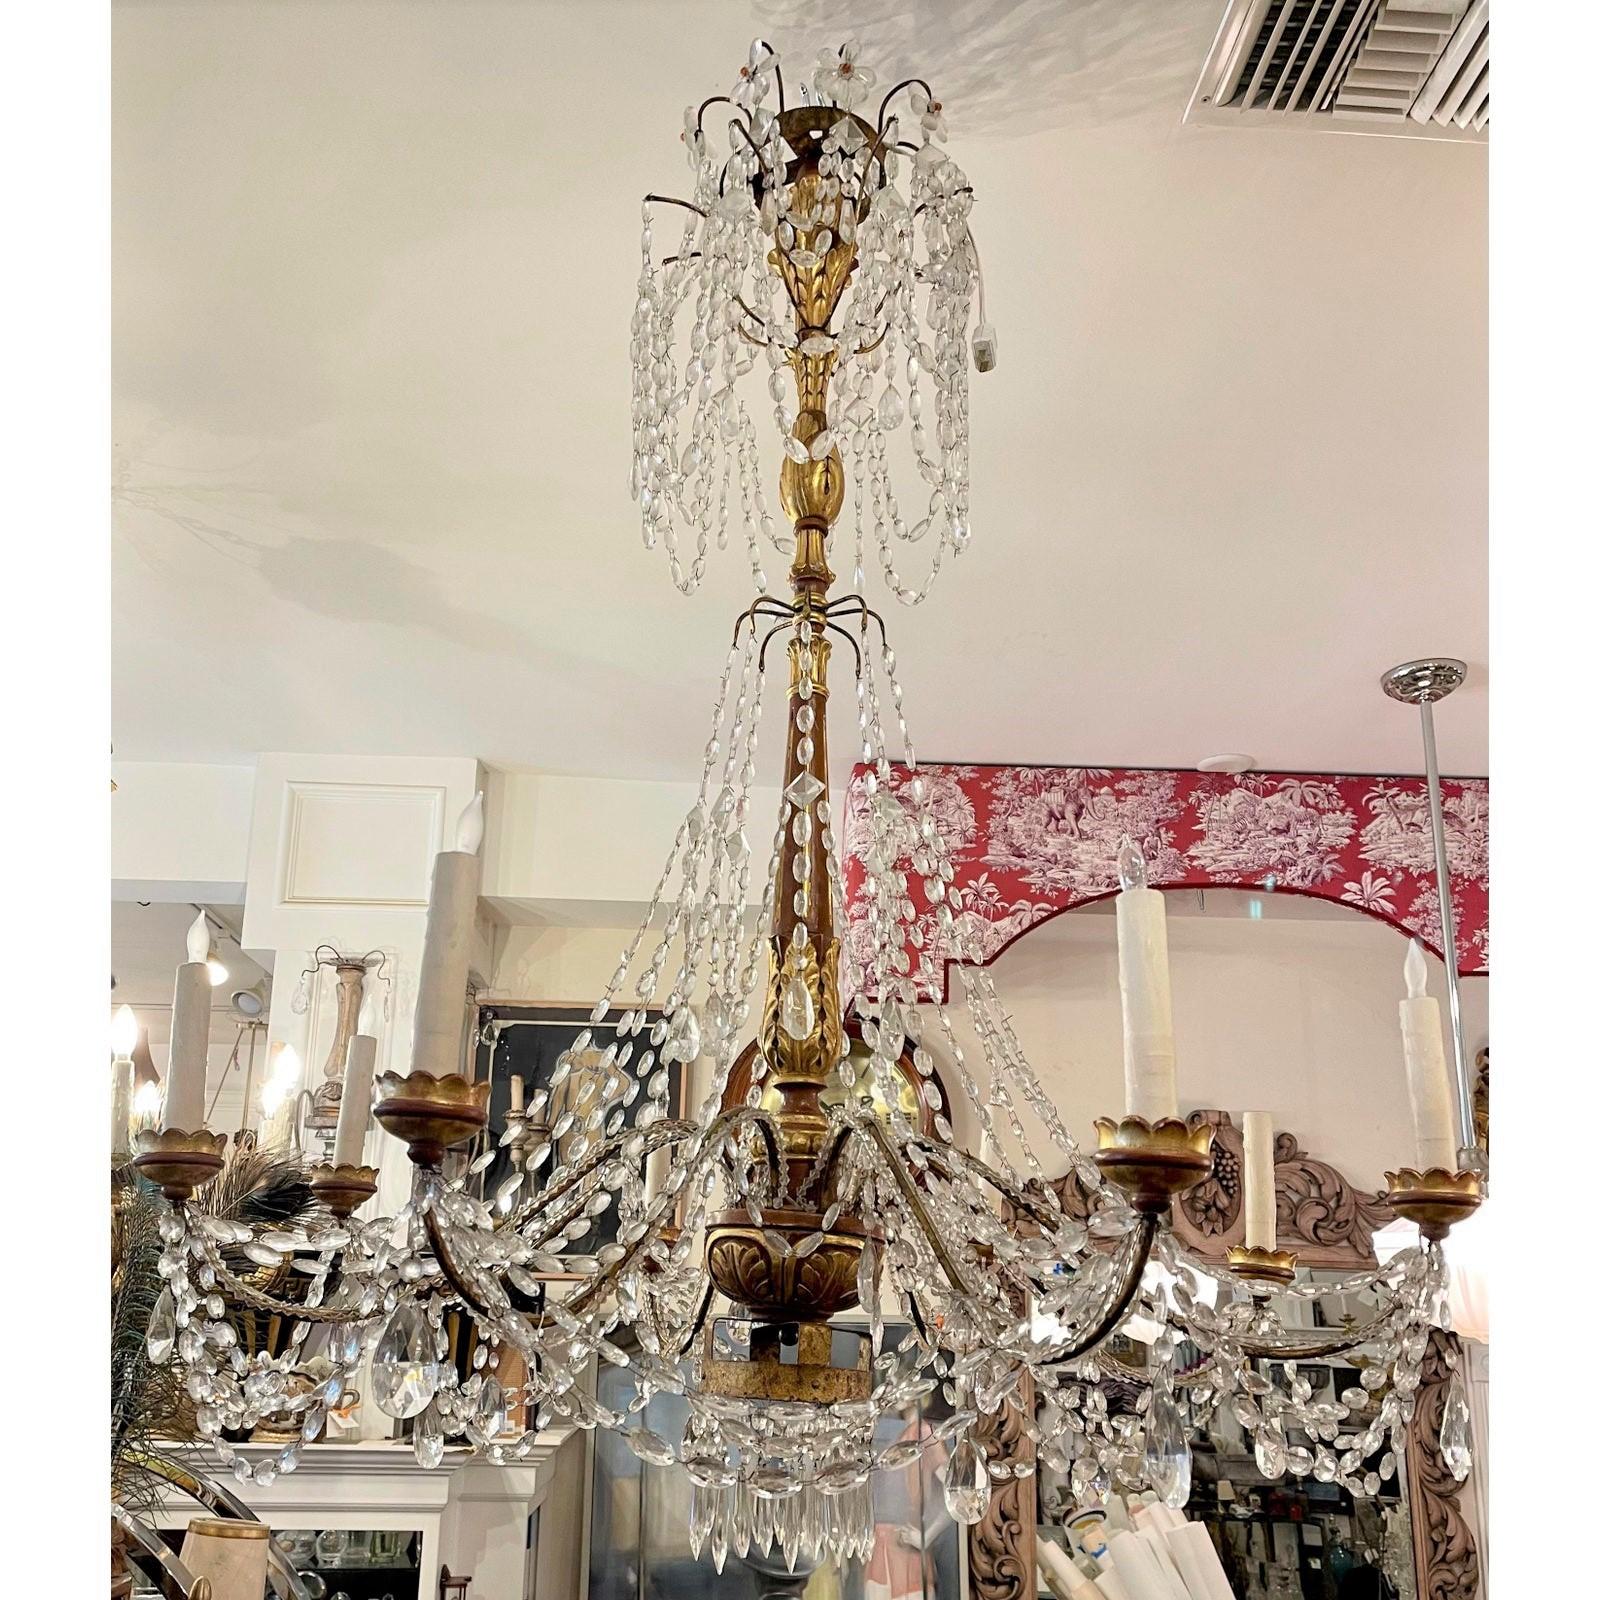 Monumental antique Italian giltwood chandelier - therien collection.